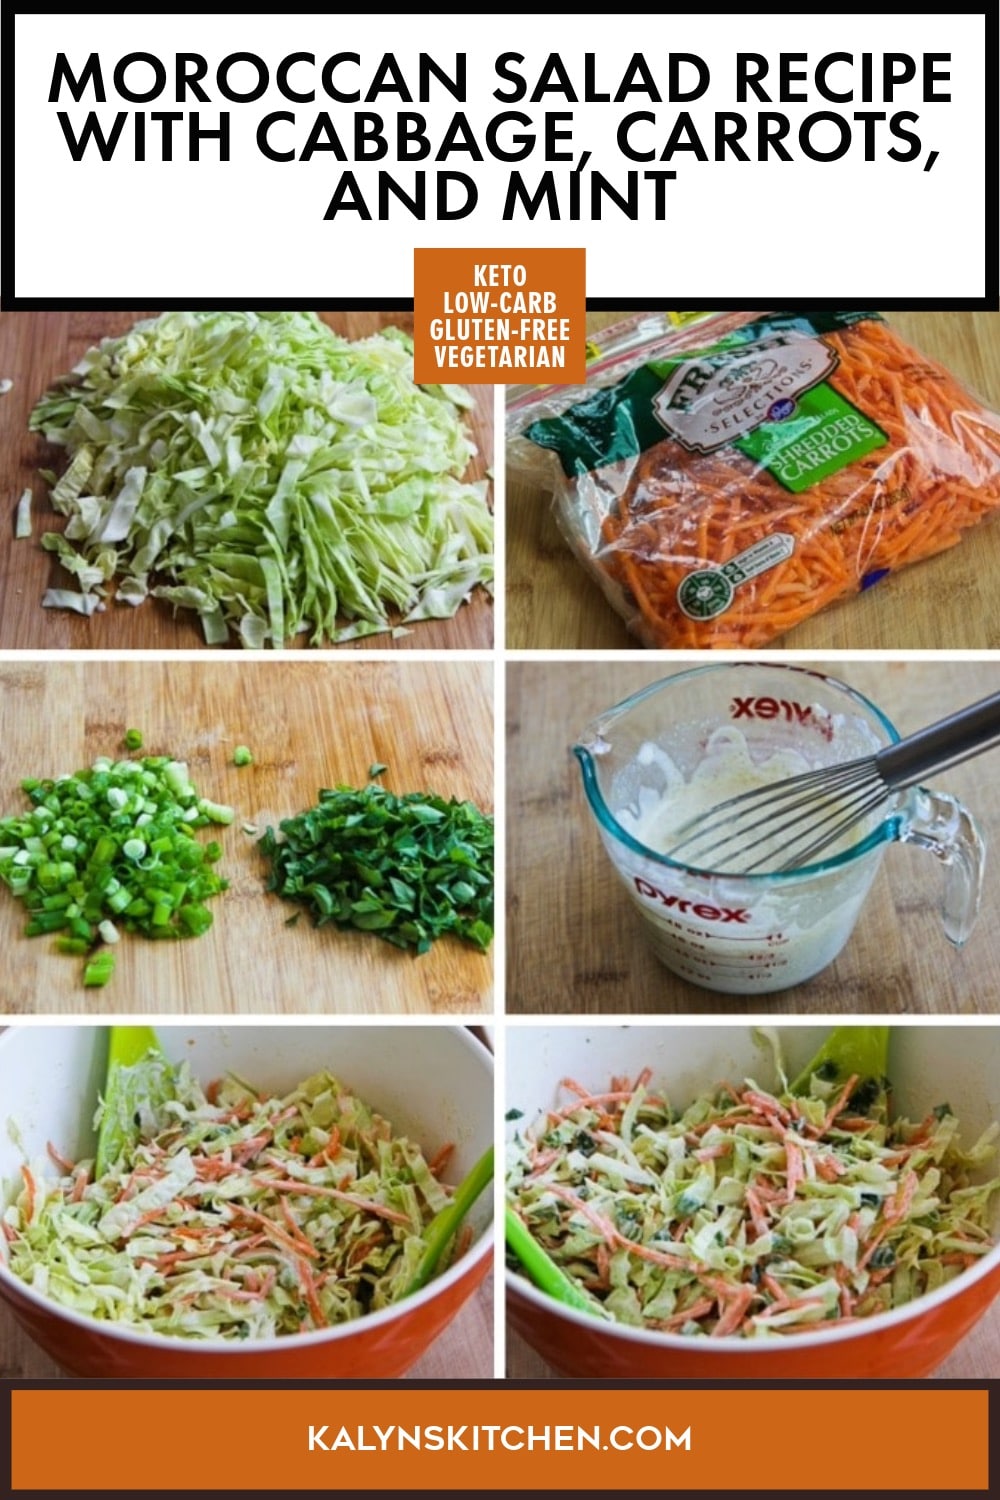 Pinterest image of Moroccan Salad Recipe with Cabbage, Carrots, and Mint